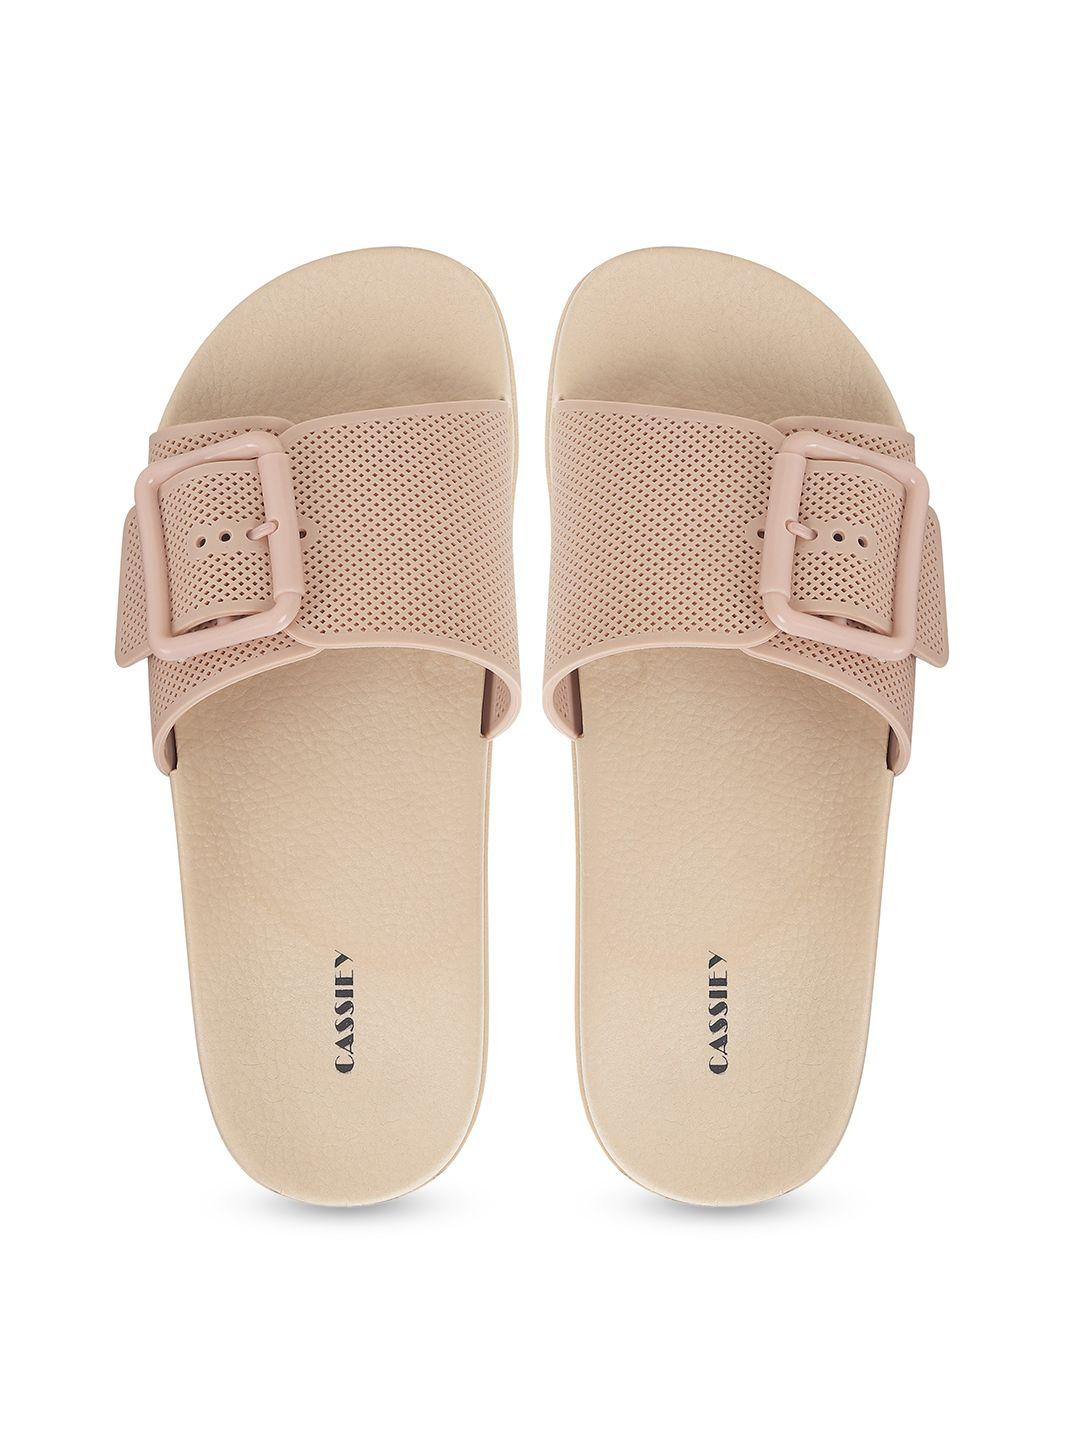 cassiey women textured rubber sliders with buckle